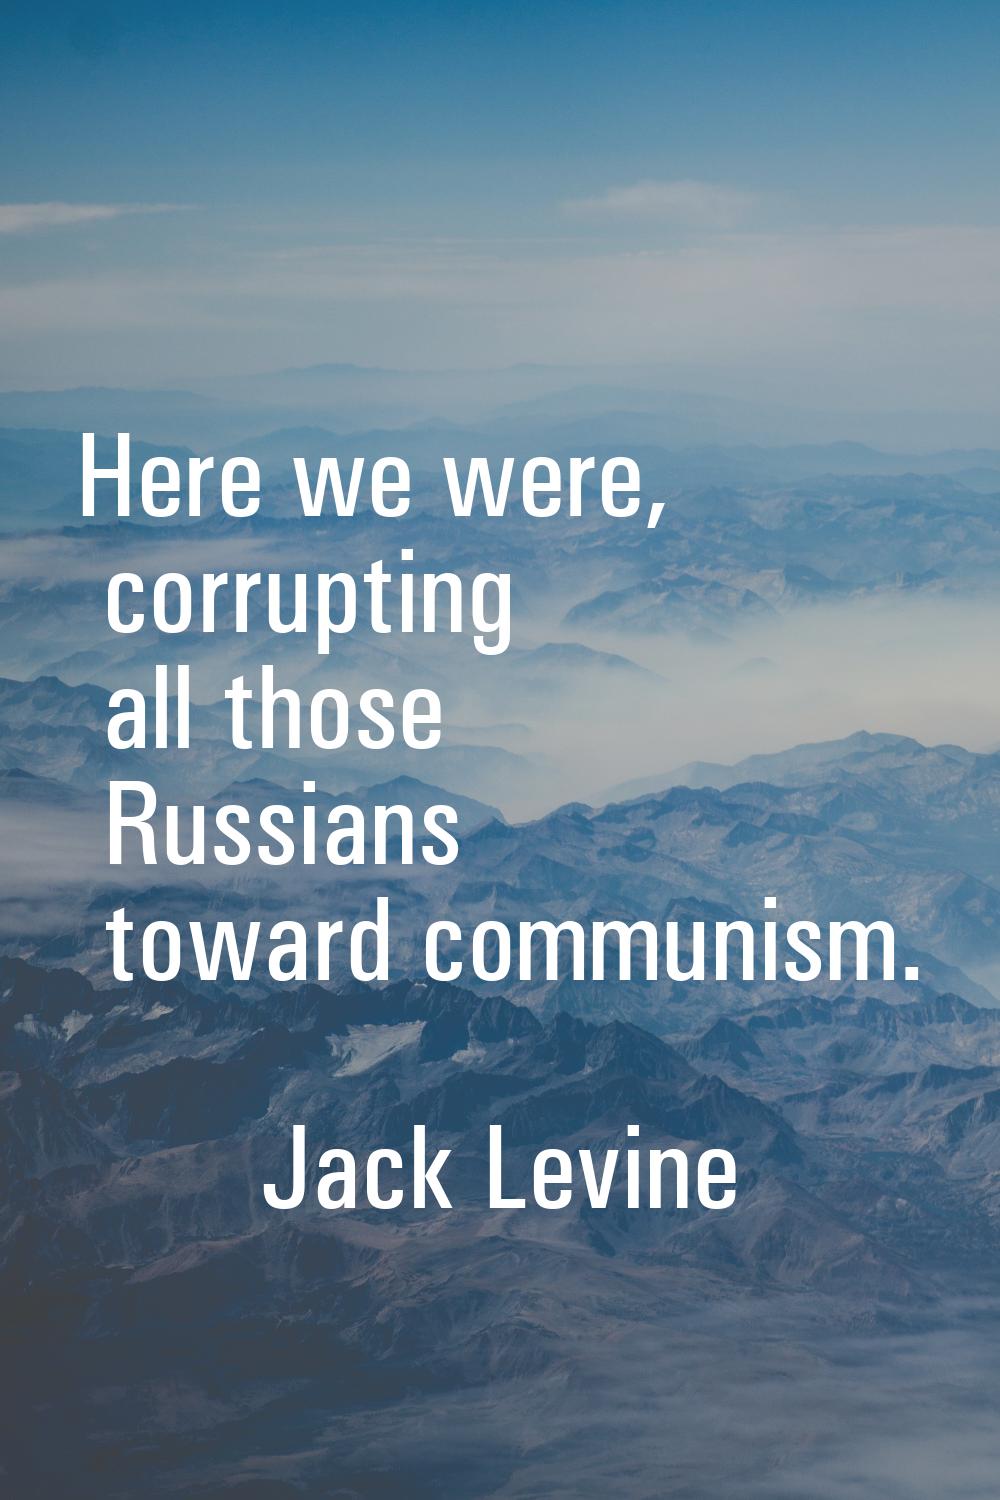 Here we were, corrupting all those Russians toward communism.